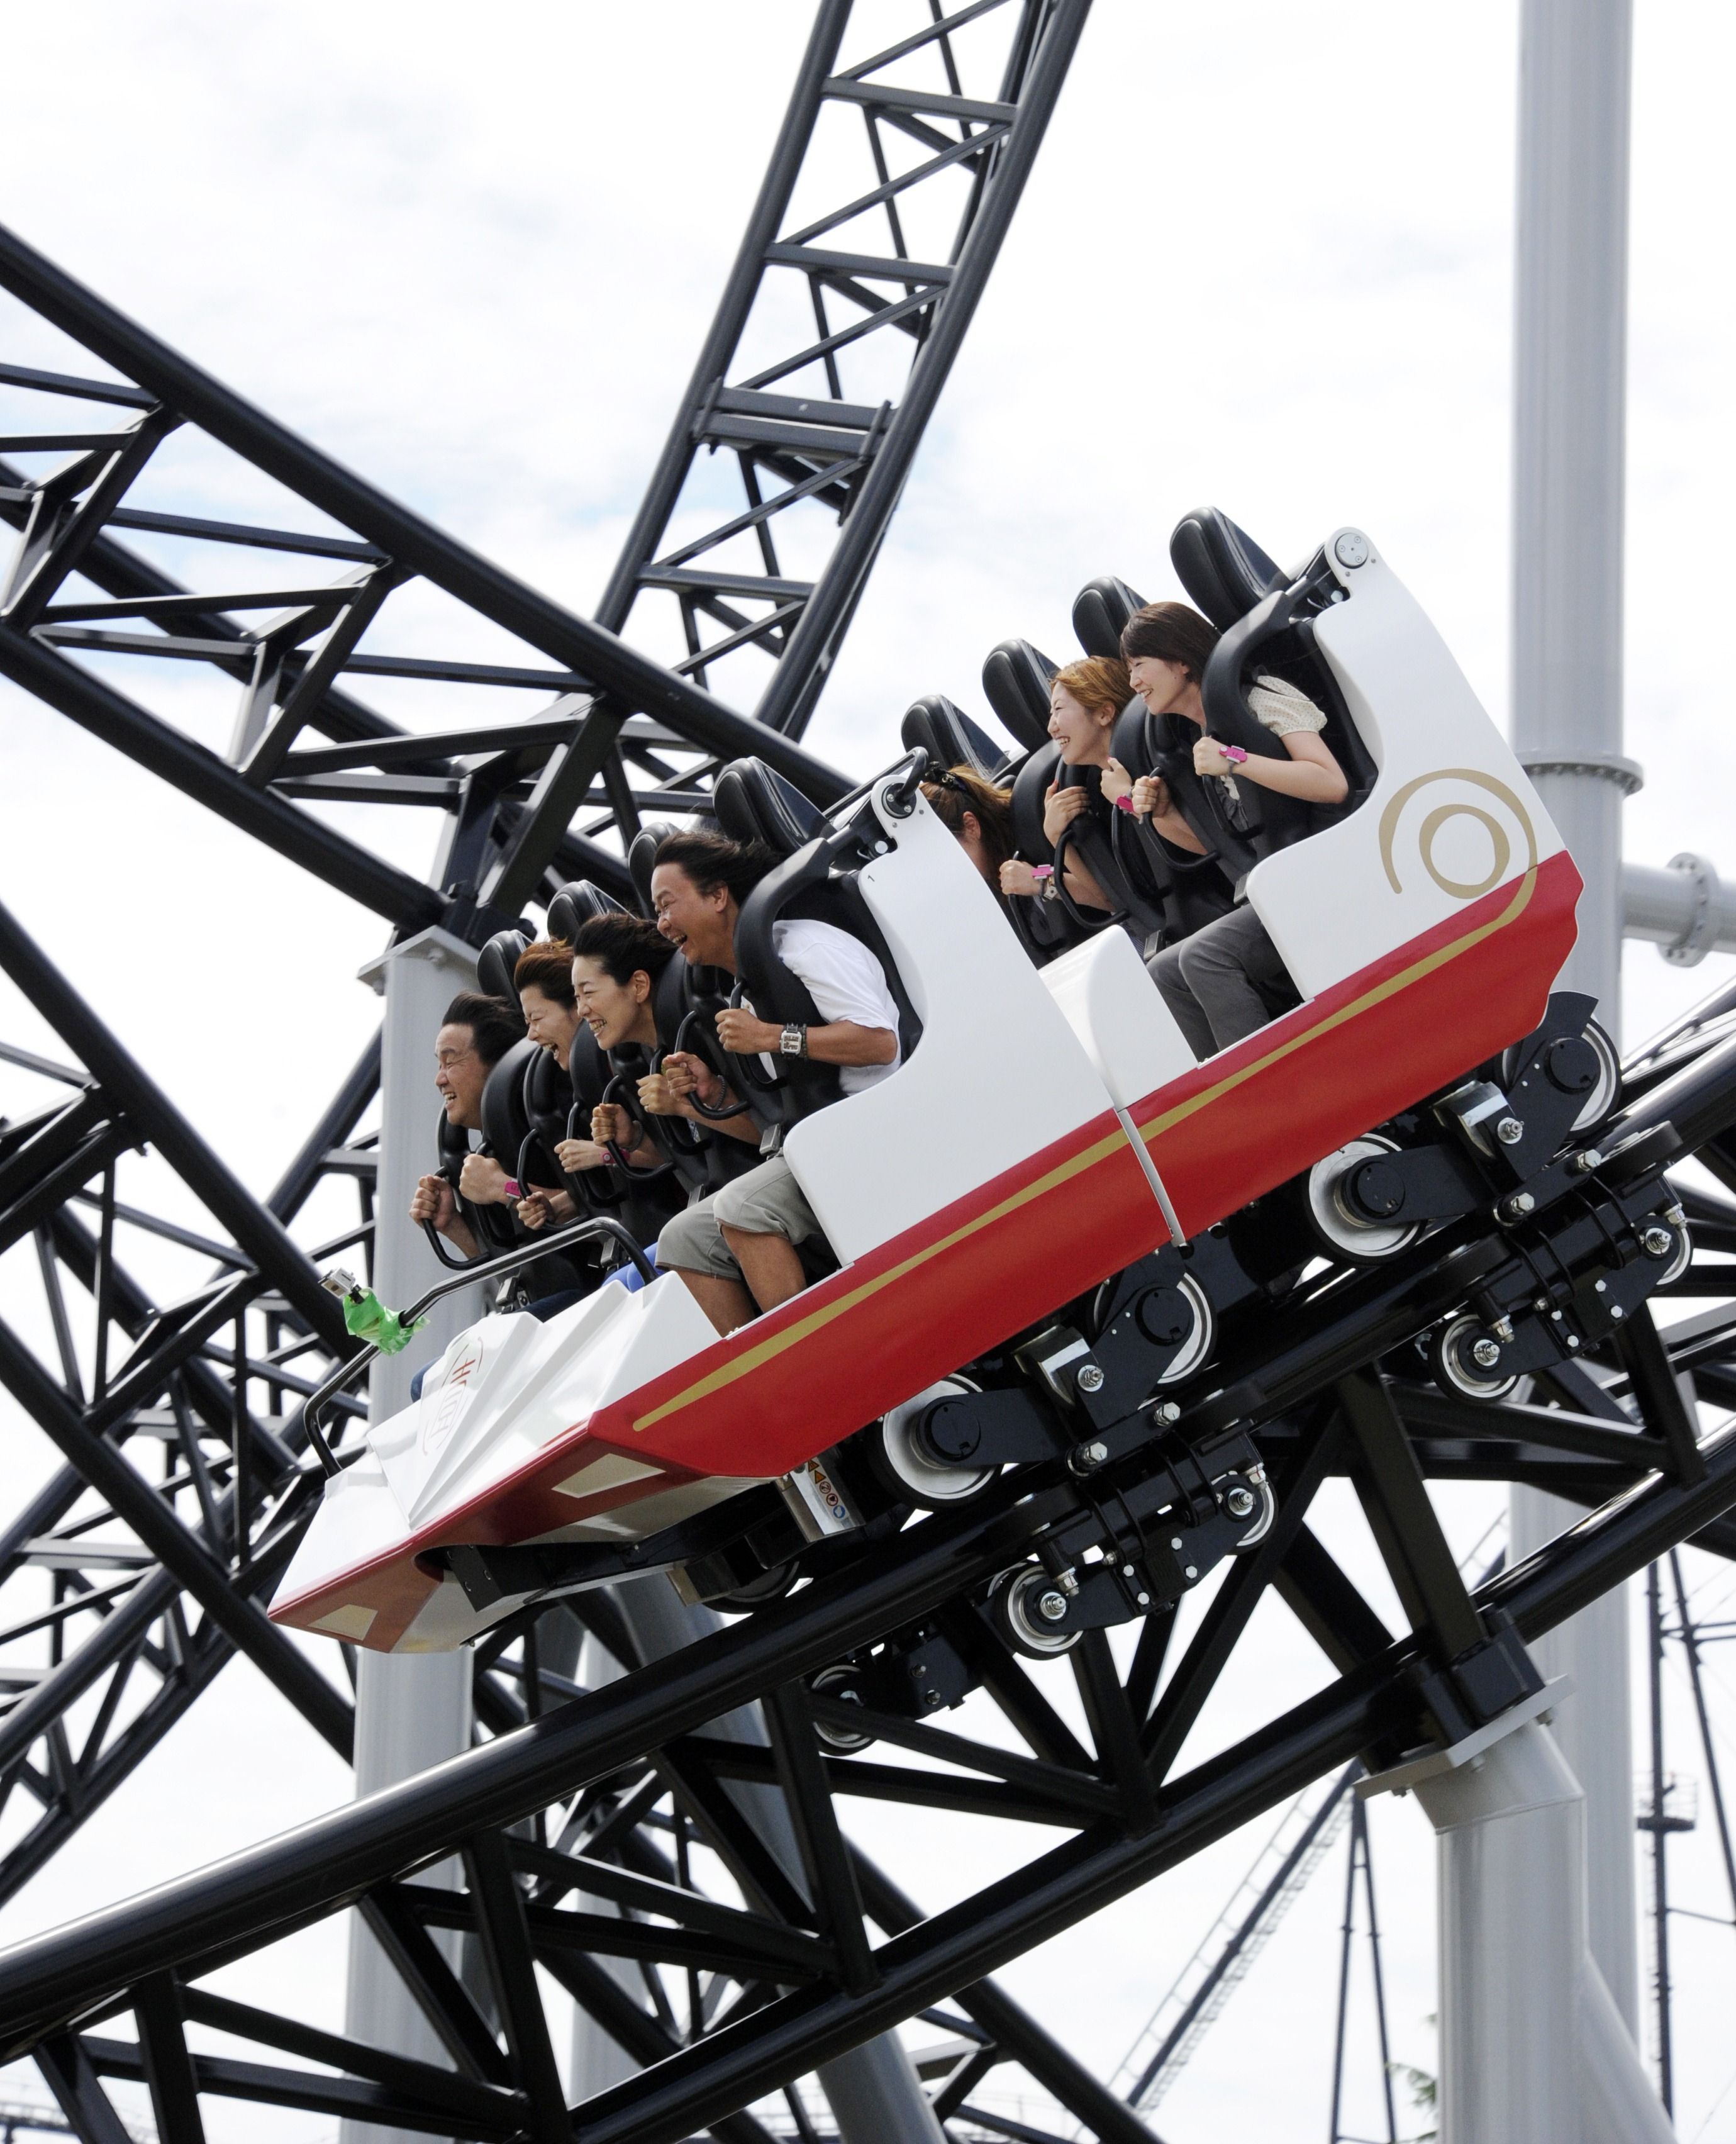 Japan Is Asking Riders Not To Scream On Roller Coasters